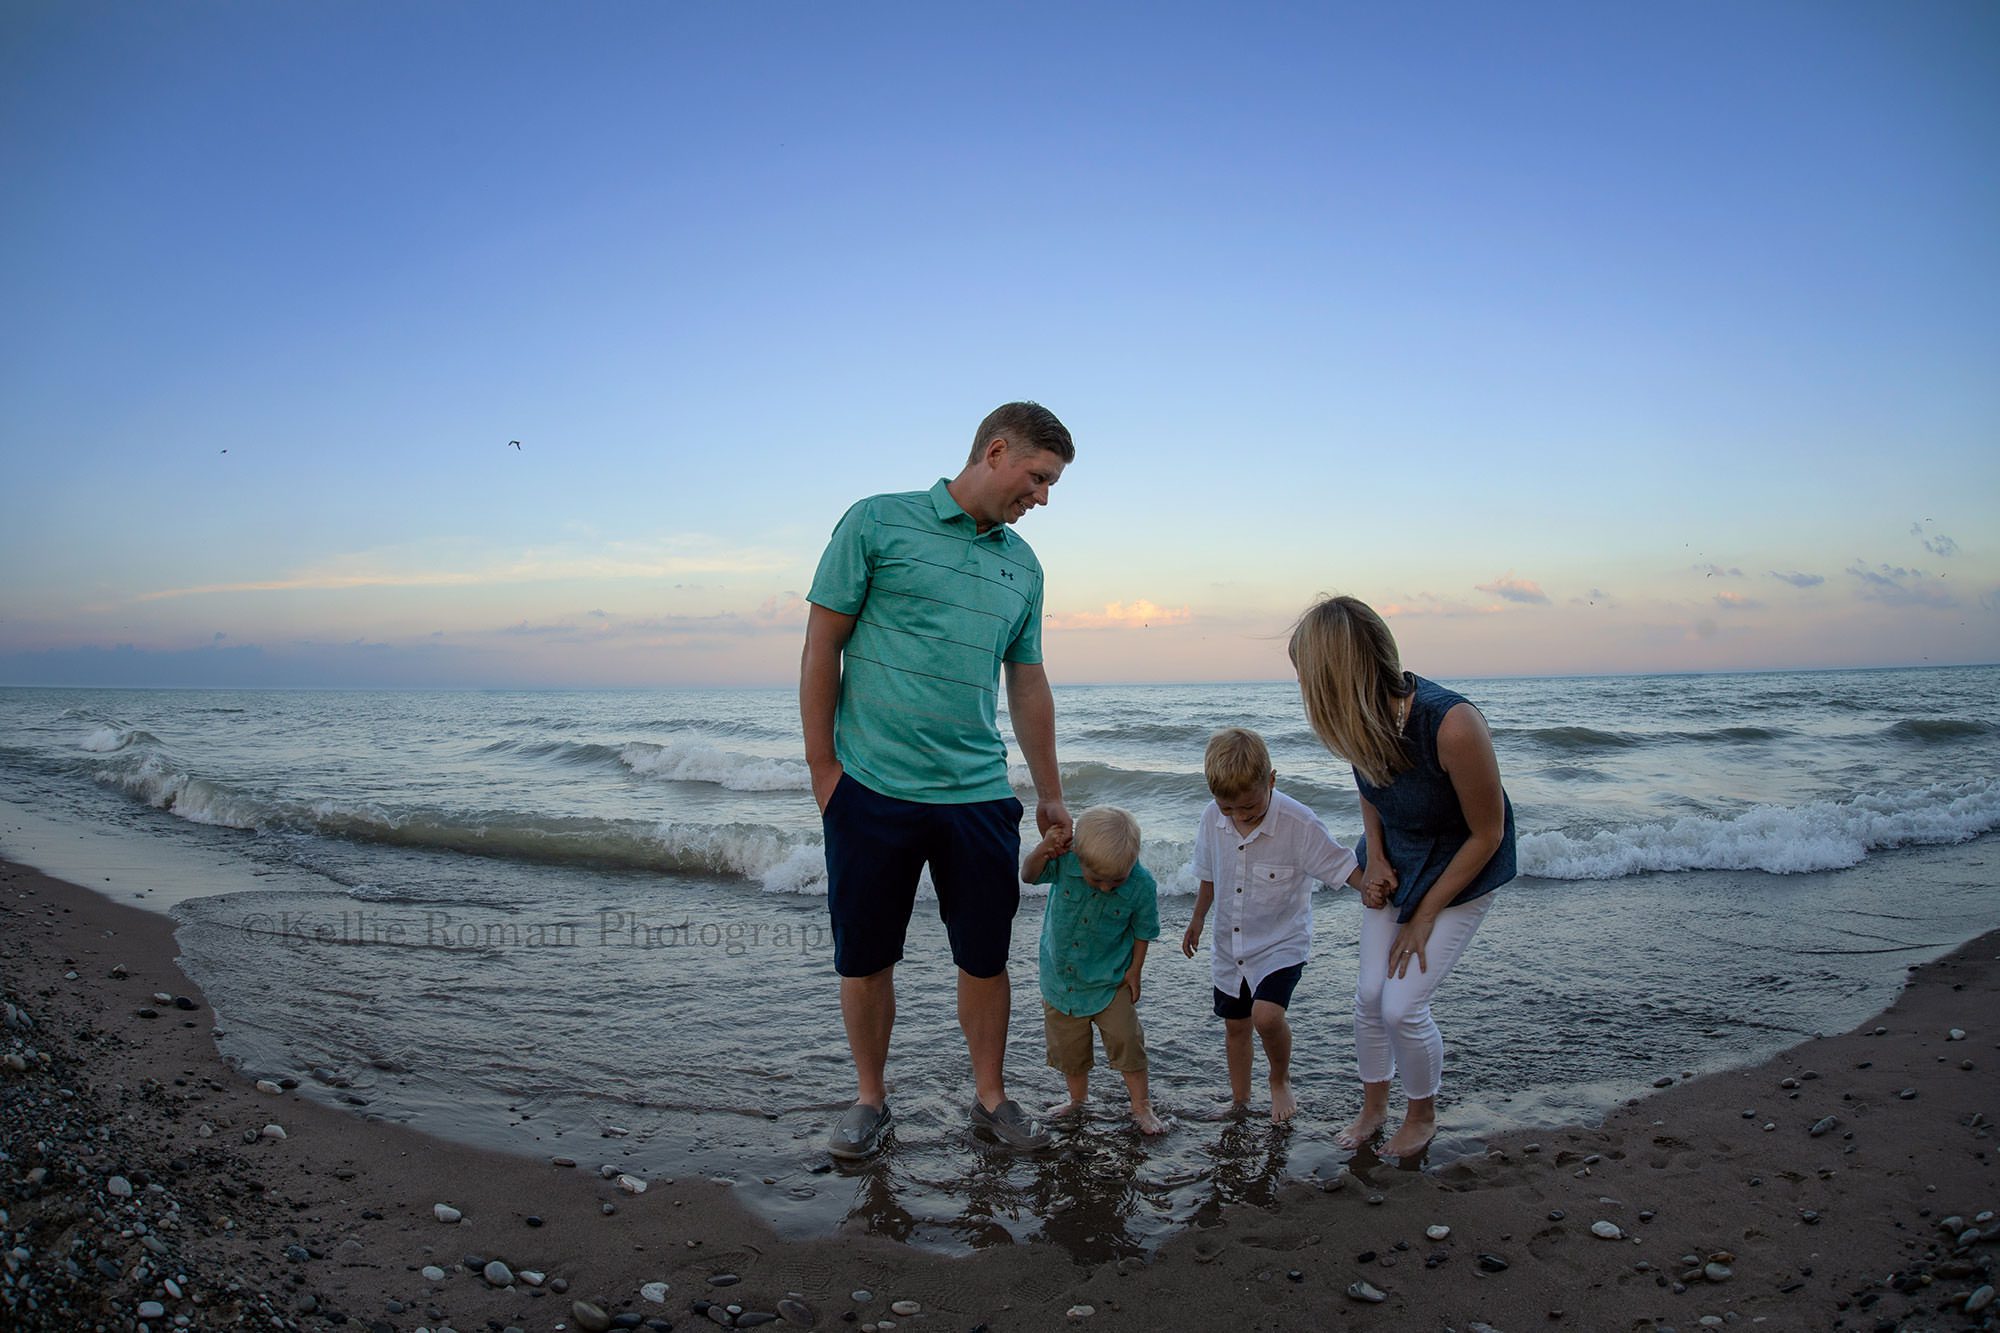 racine family session a family from racine standing in the water of Lake Michigan in racine Wisconsin dad is on one end with two boys in between and mom and on the other end they are looking down at their feet as the water washes in they have on shorts and button up shirts the sky is shades of pastel since the sun is setting bird are flying in the background